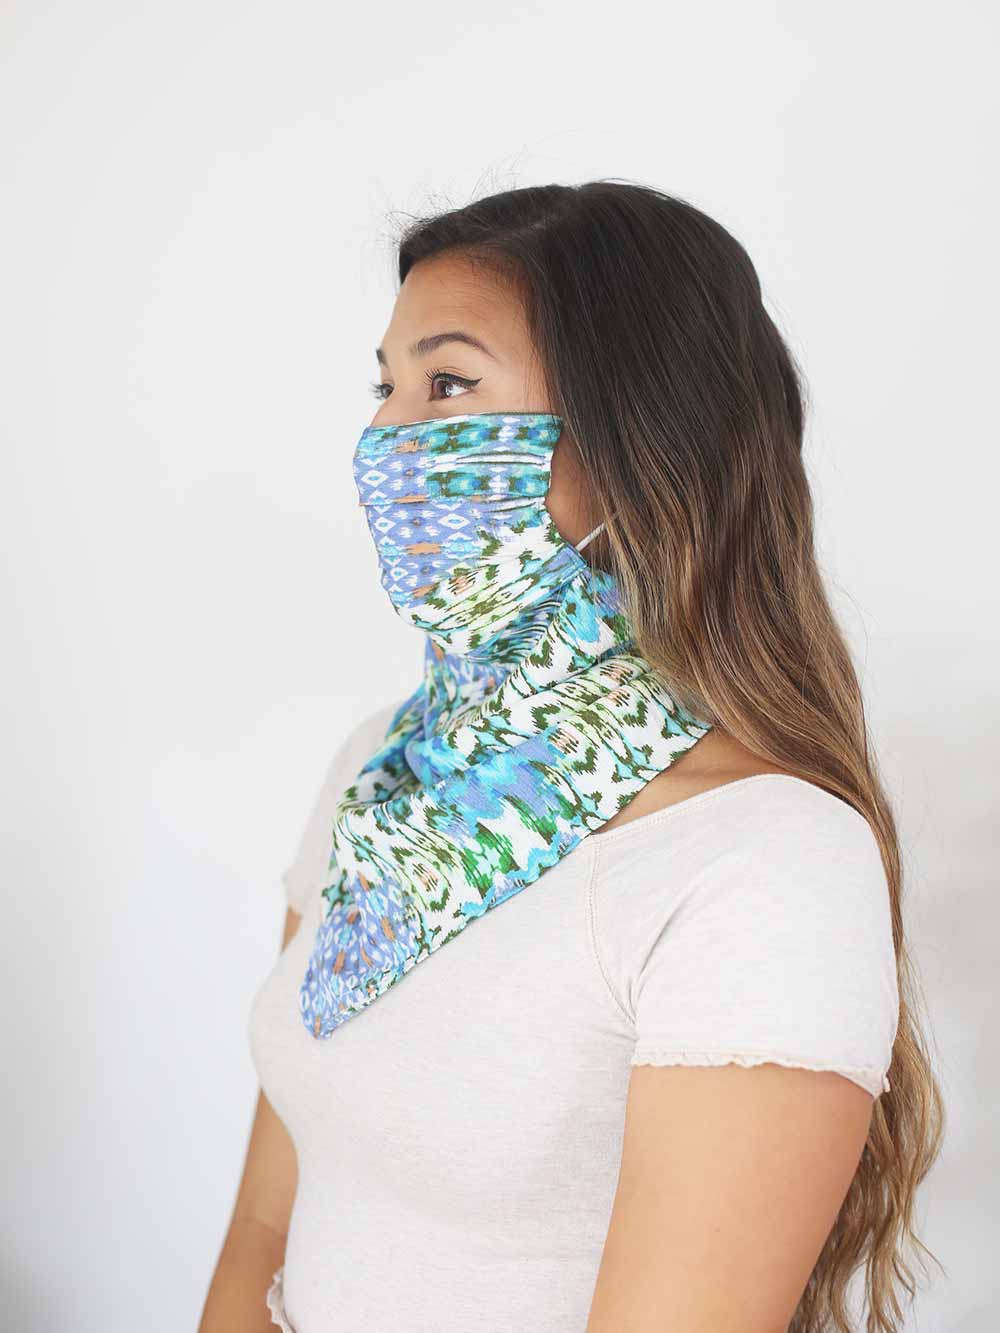 Scarf facemask